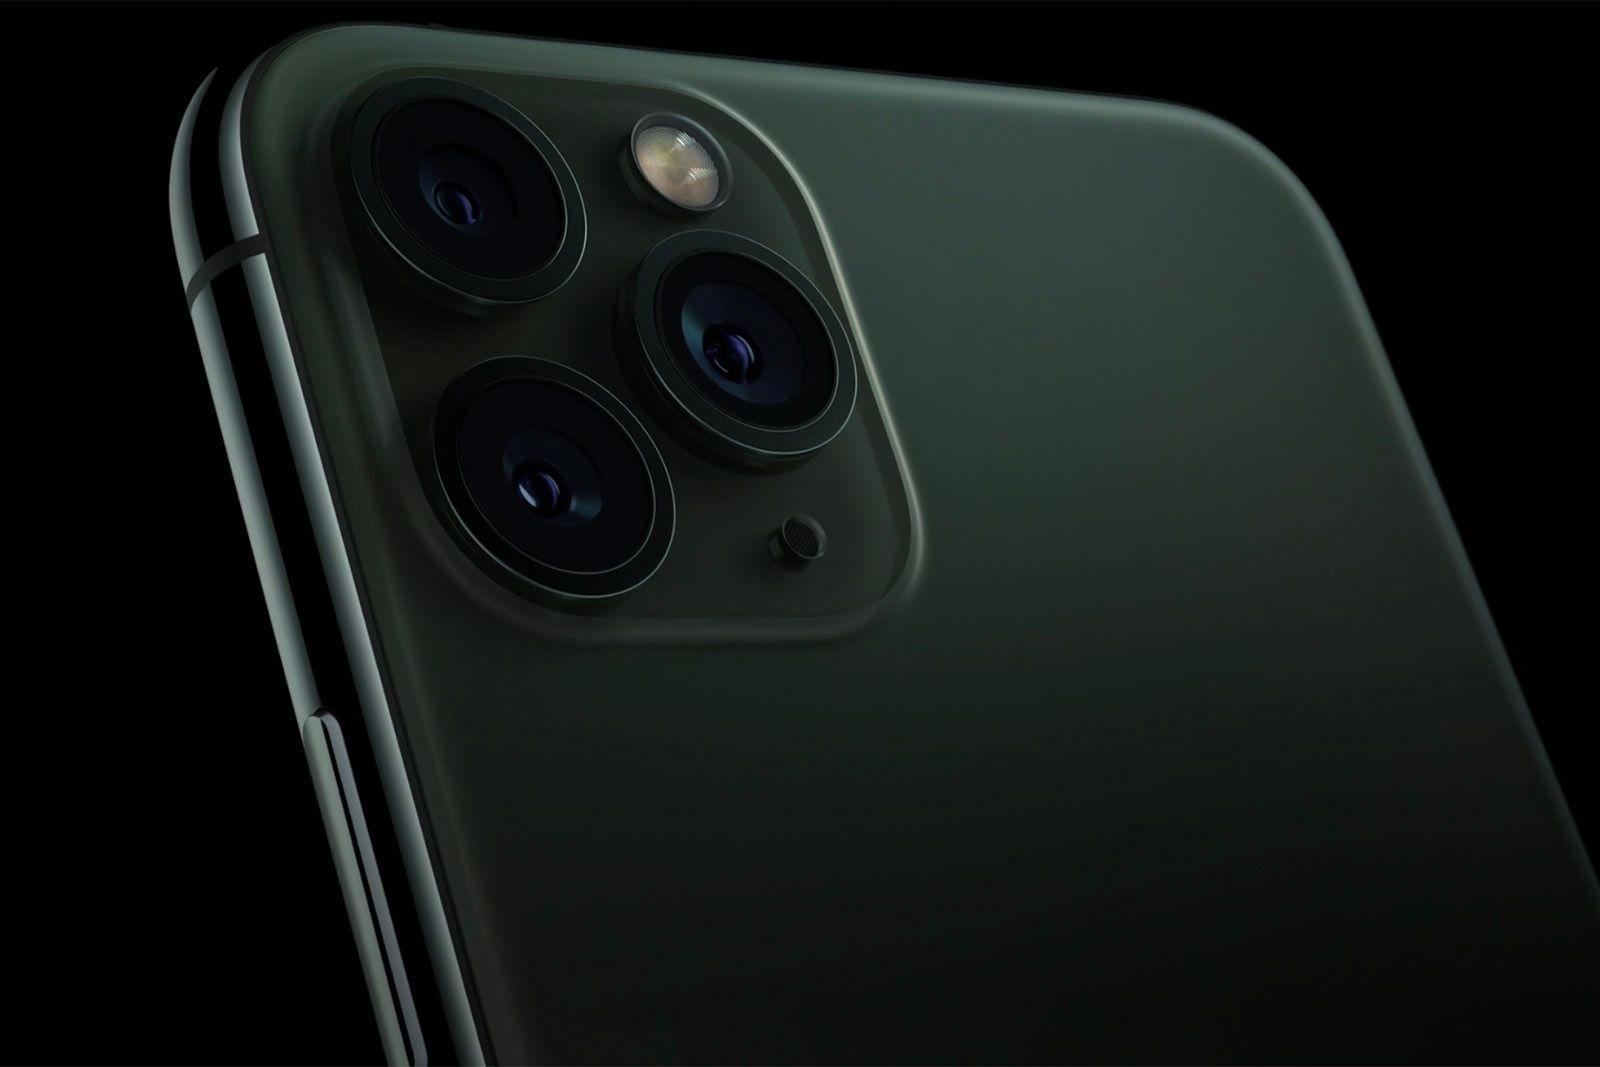 Apple iPhone 11 Pro cameras explained image 1